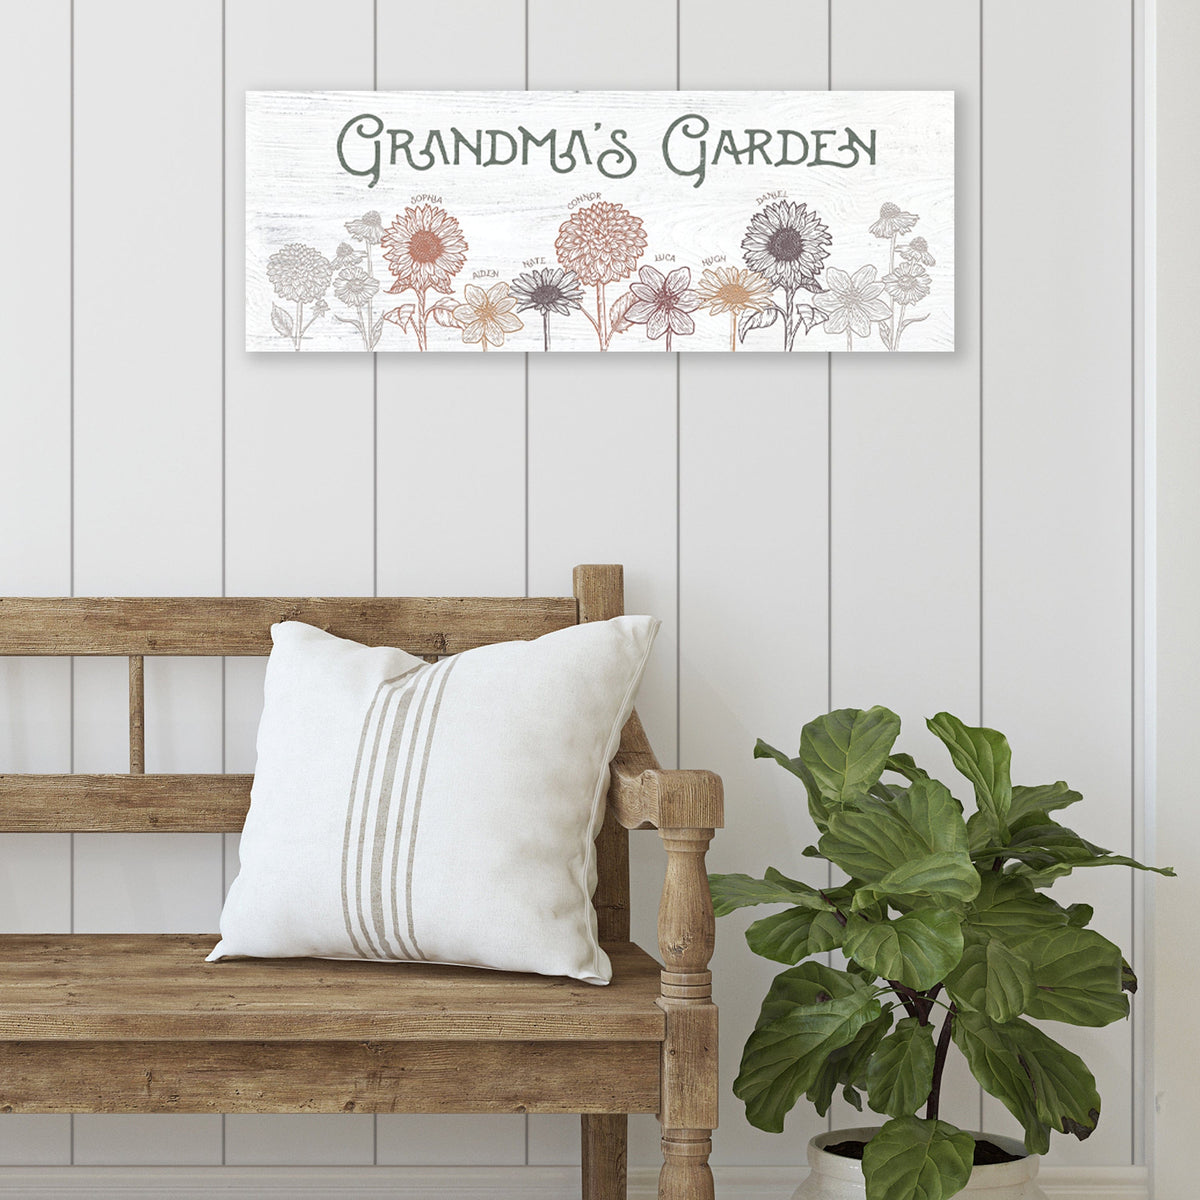 Custom Grandma Gift From Grandkids, Grandmother Christmas Gifts With  Grandkids Name, Grandma Garden Gifts Canvas - Best Personalized Gifts For  Everyone